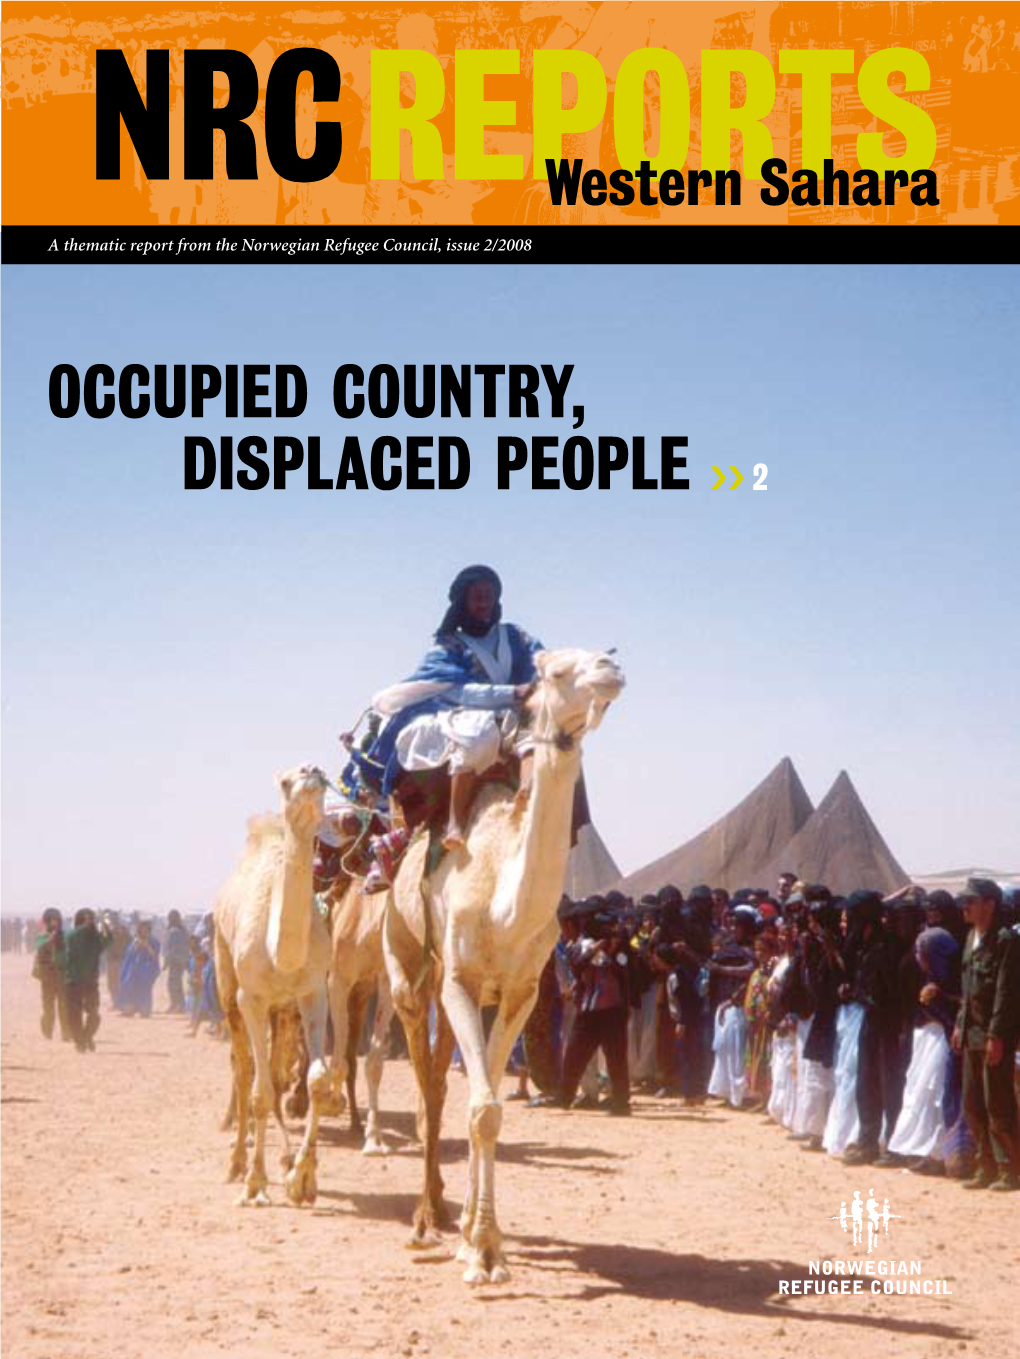 Occupied Country, Displaced People ›› 2